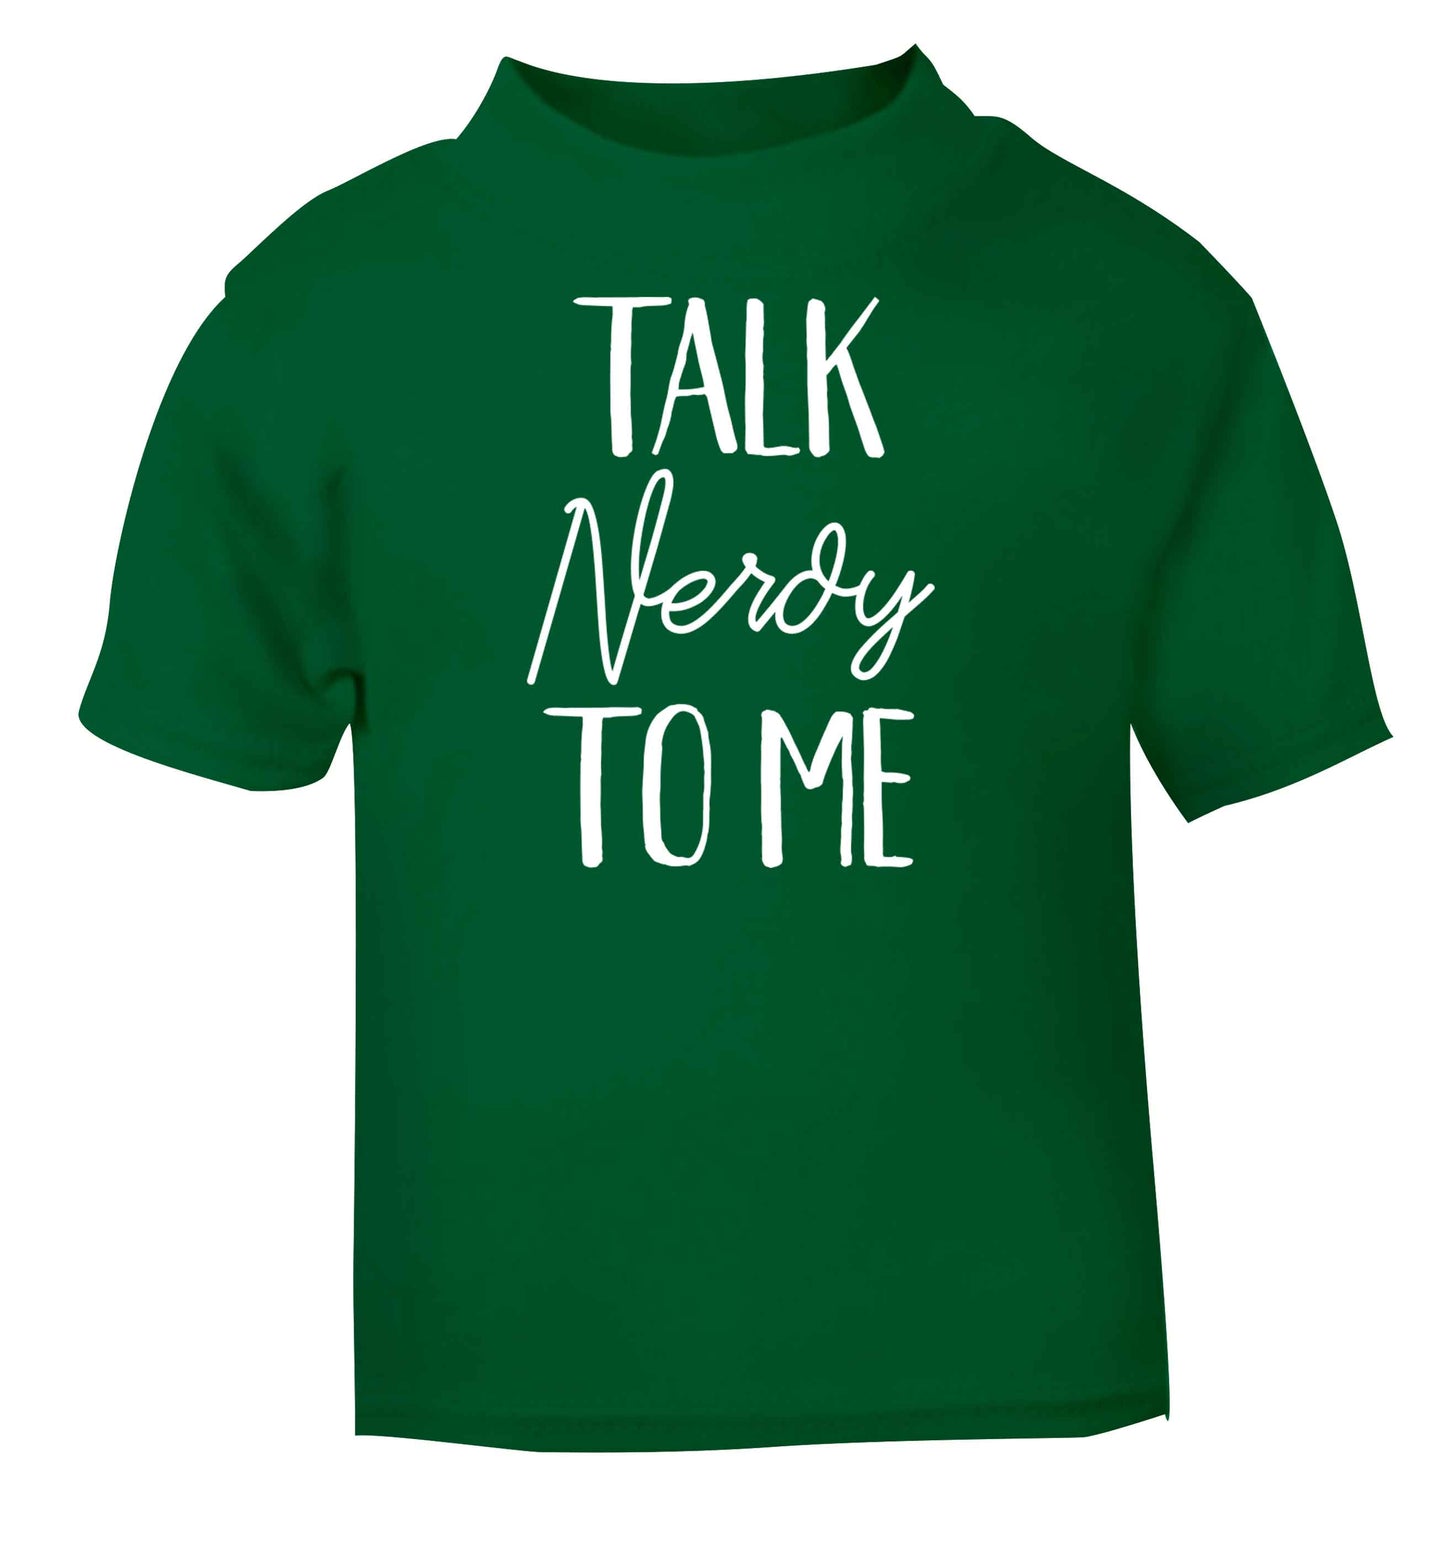 Talk nerdy to me green baby toddler Tshirt 2 Years